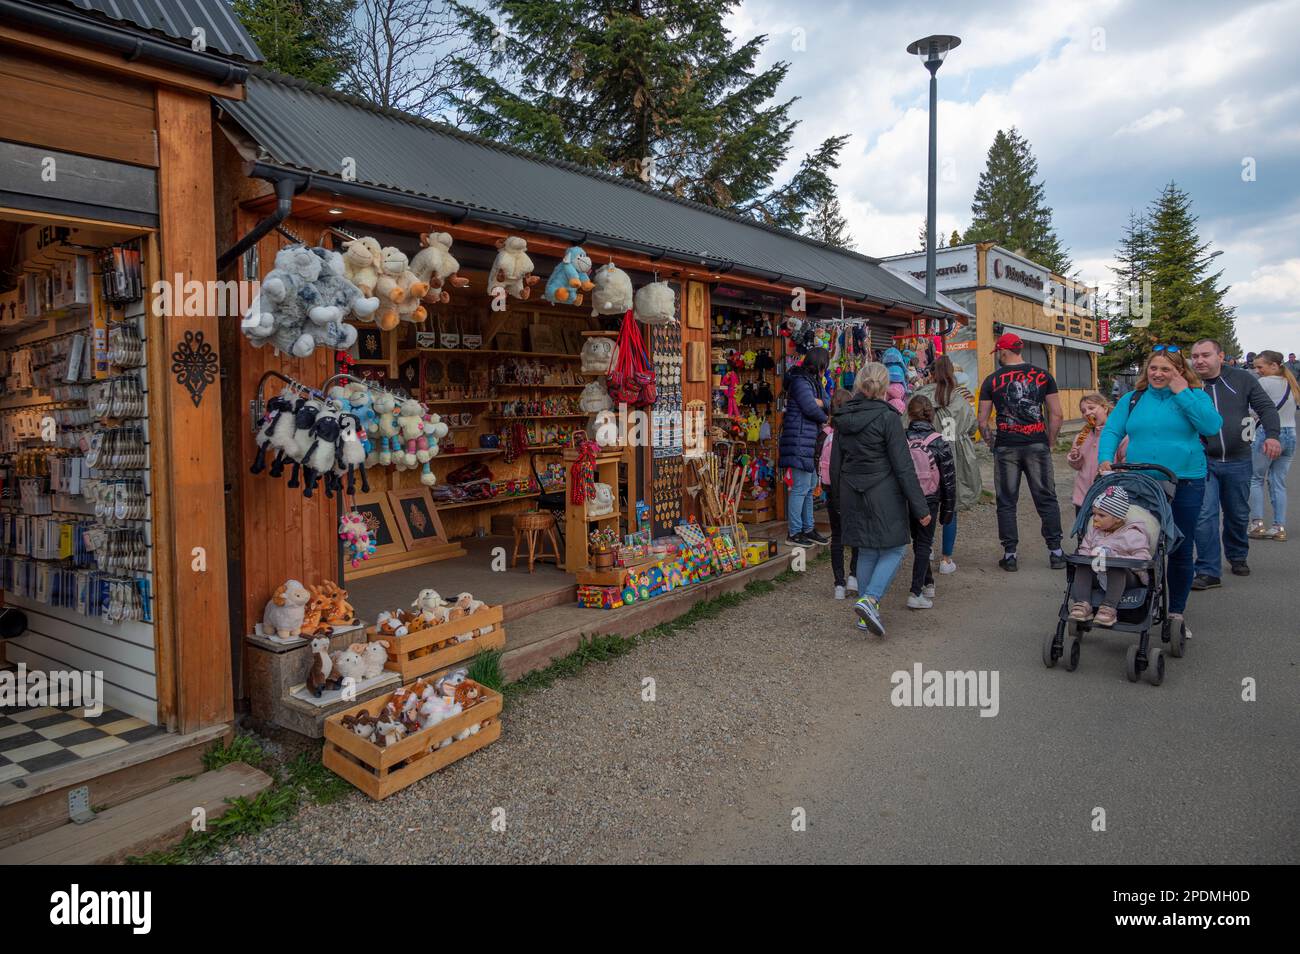 View of a Souvenir shop on the streets selling winter clothes, colorful magnets, stuffed toys and collectibles captured at Zakopane, Poland. Stock Photo